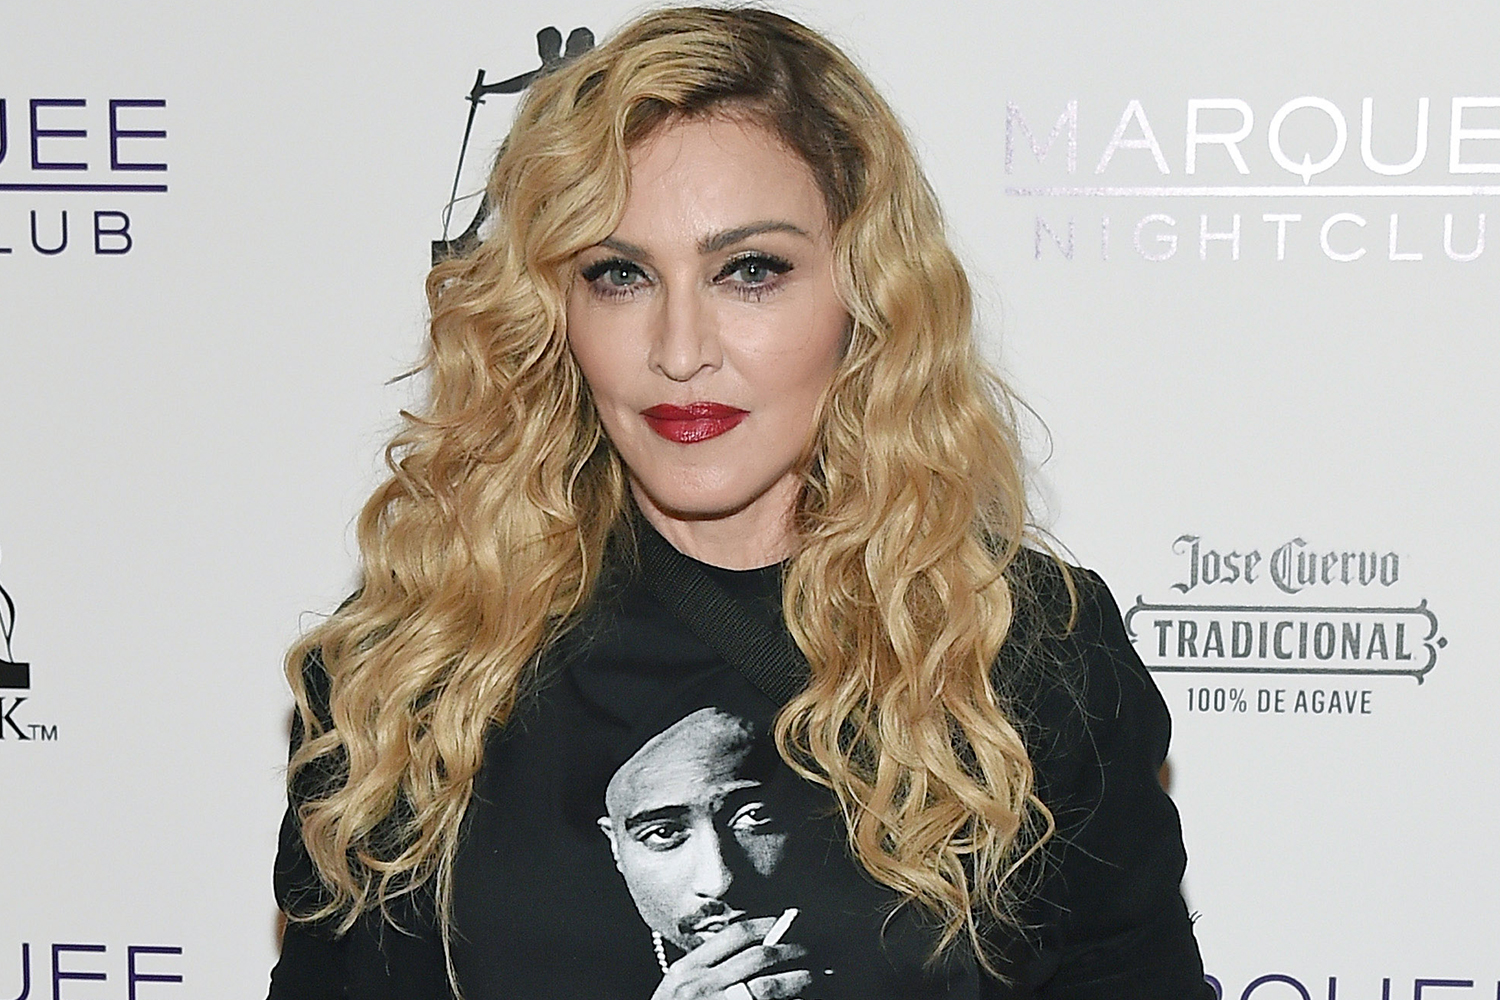 Madonna says Tory Lanez illegally used her 1985 song, “Into The Groove,” on “Pluto’s Last Comet” 1